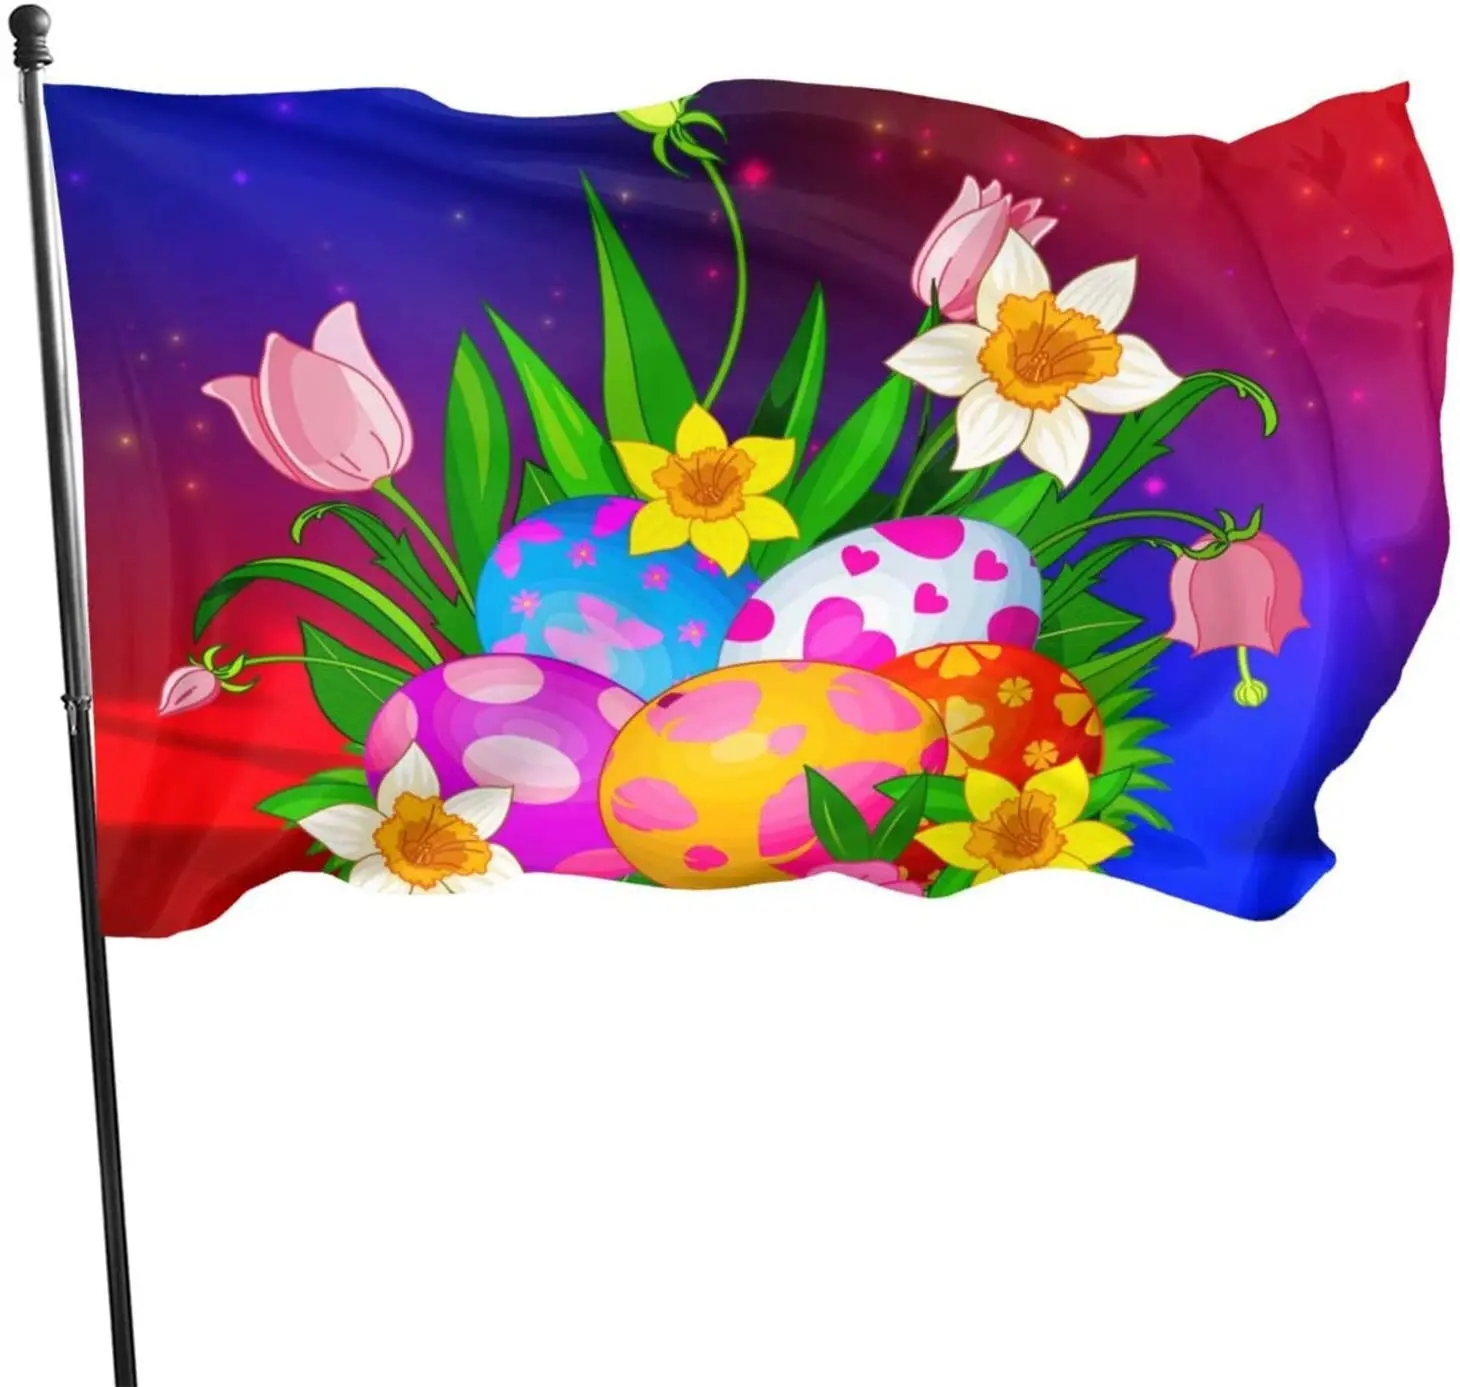 

Happy Easter Flowers Egg Flag 3x5 Ft Large Sewn Polyester Banner Outside Hanging Standard Flag for Yard Garden Lawn Holiday